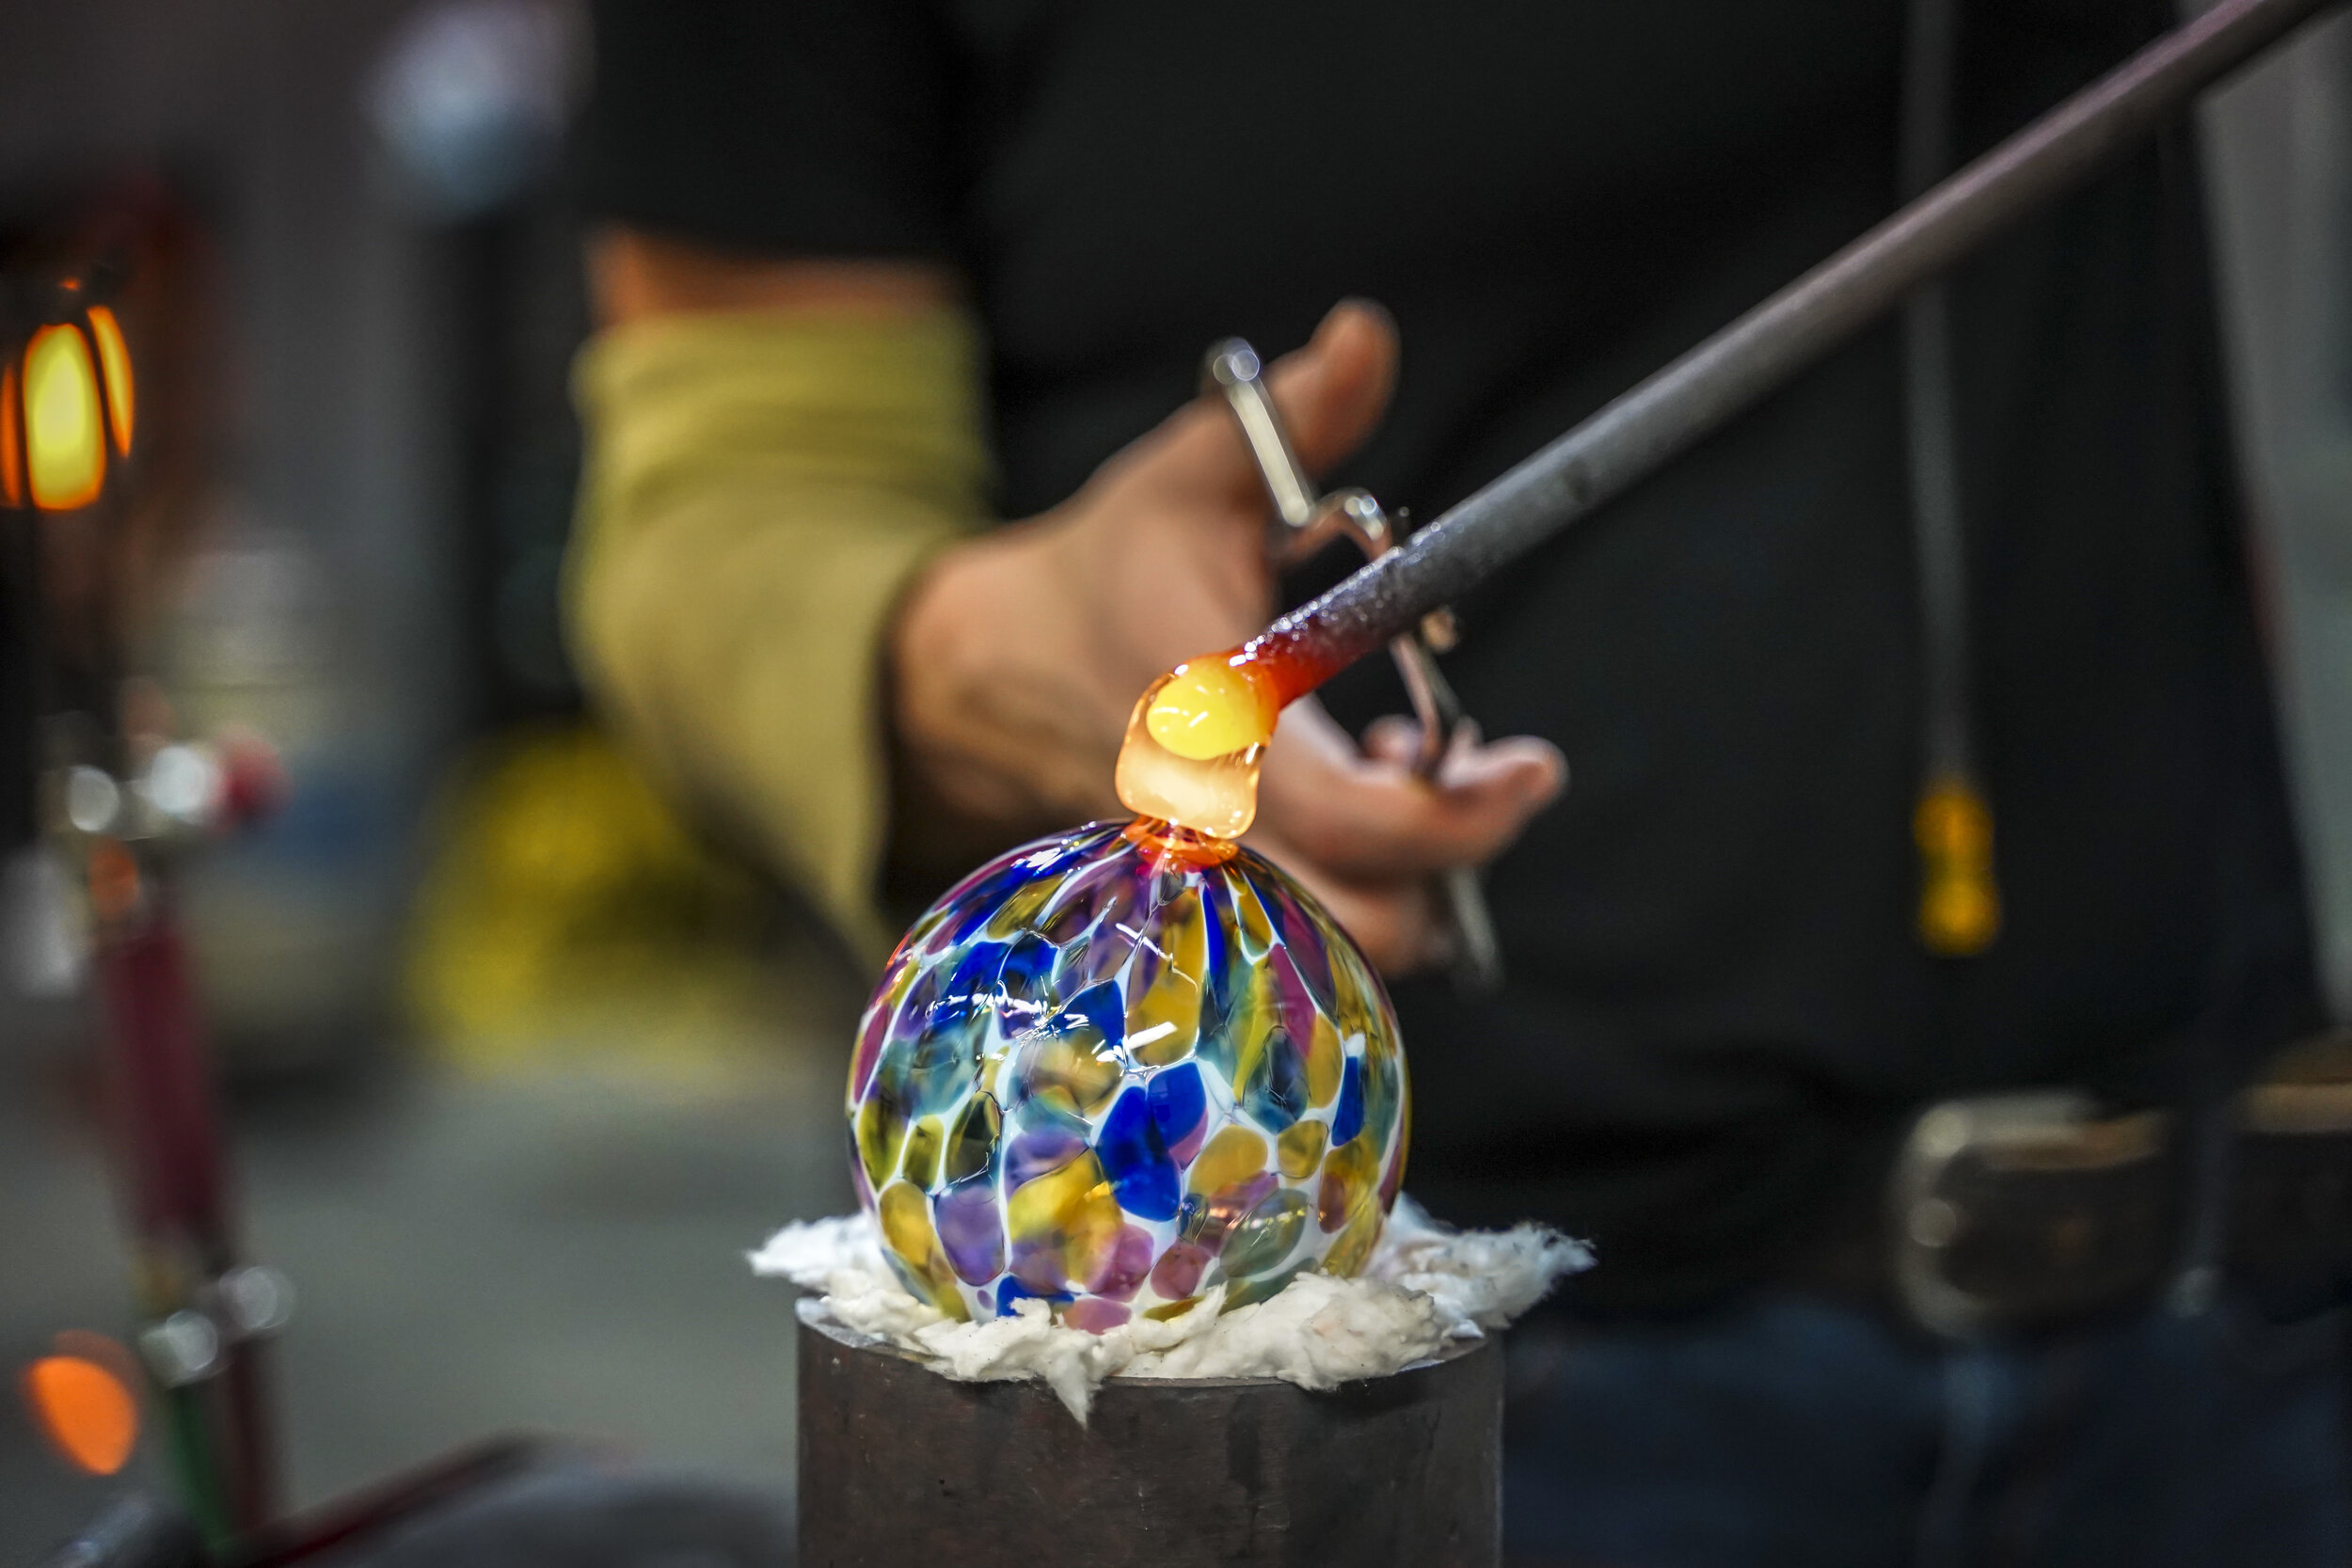 Someone glass blowing